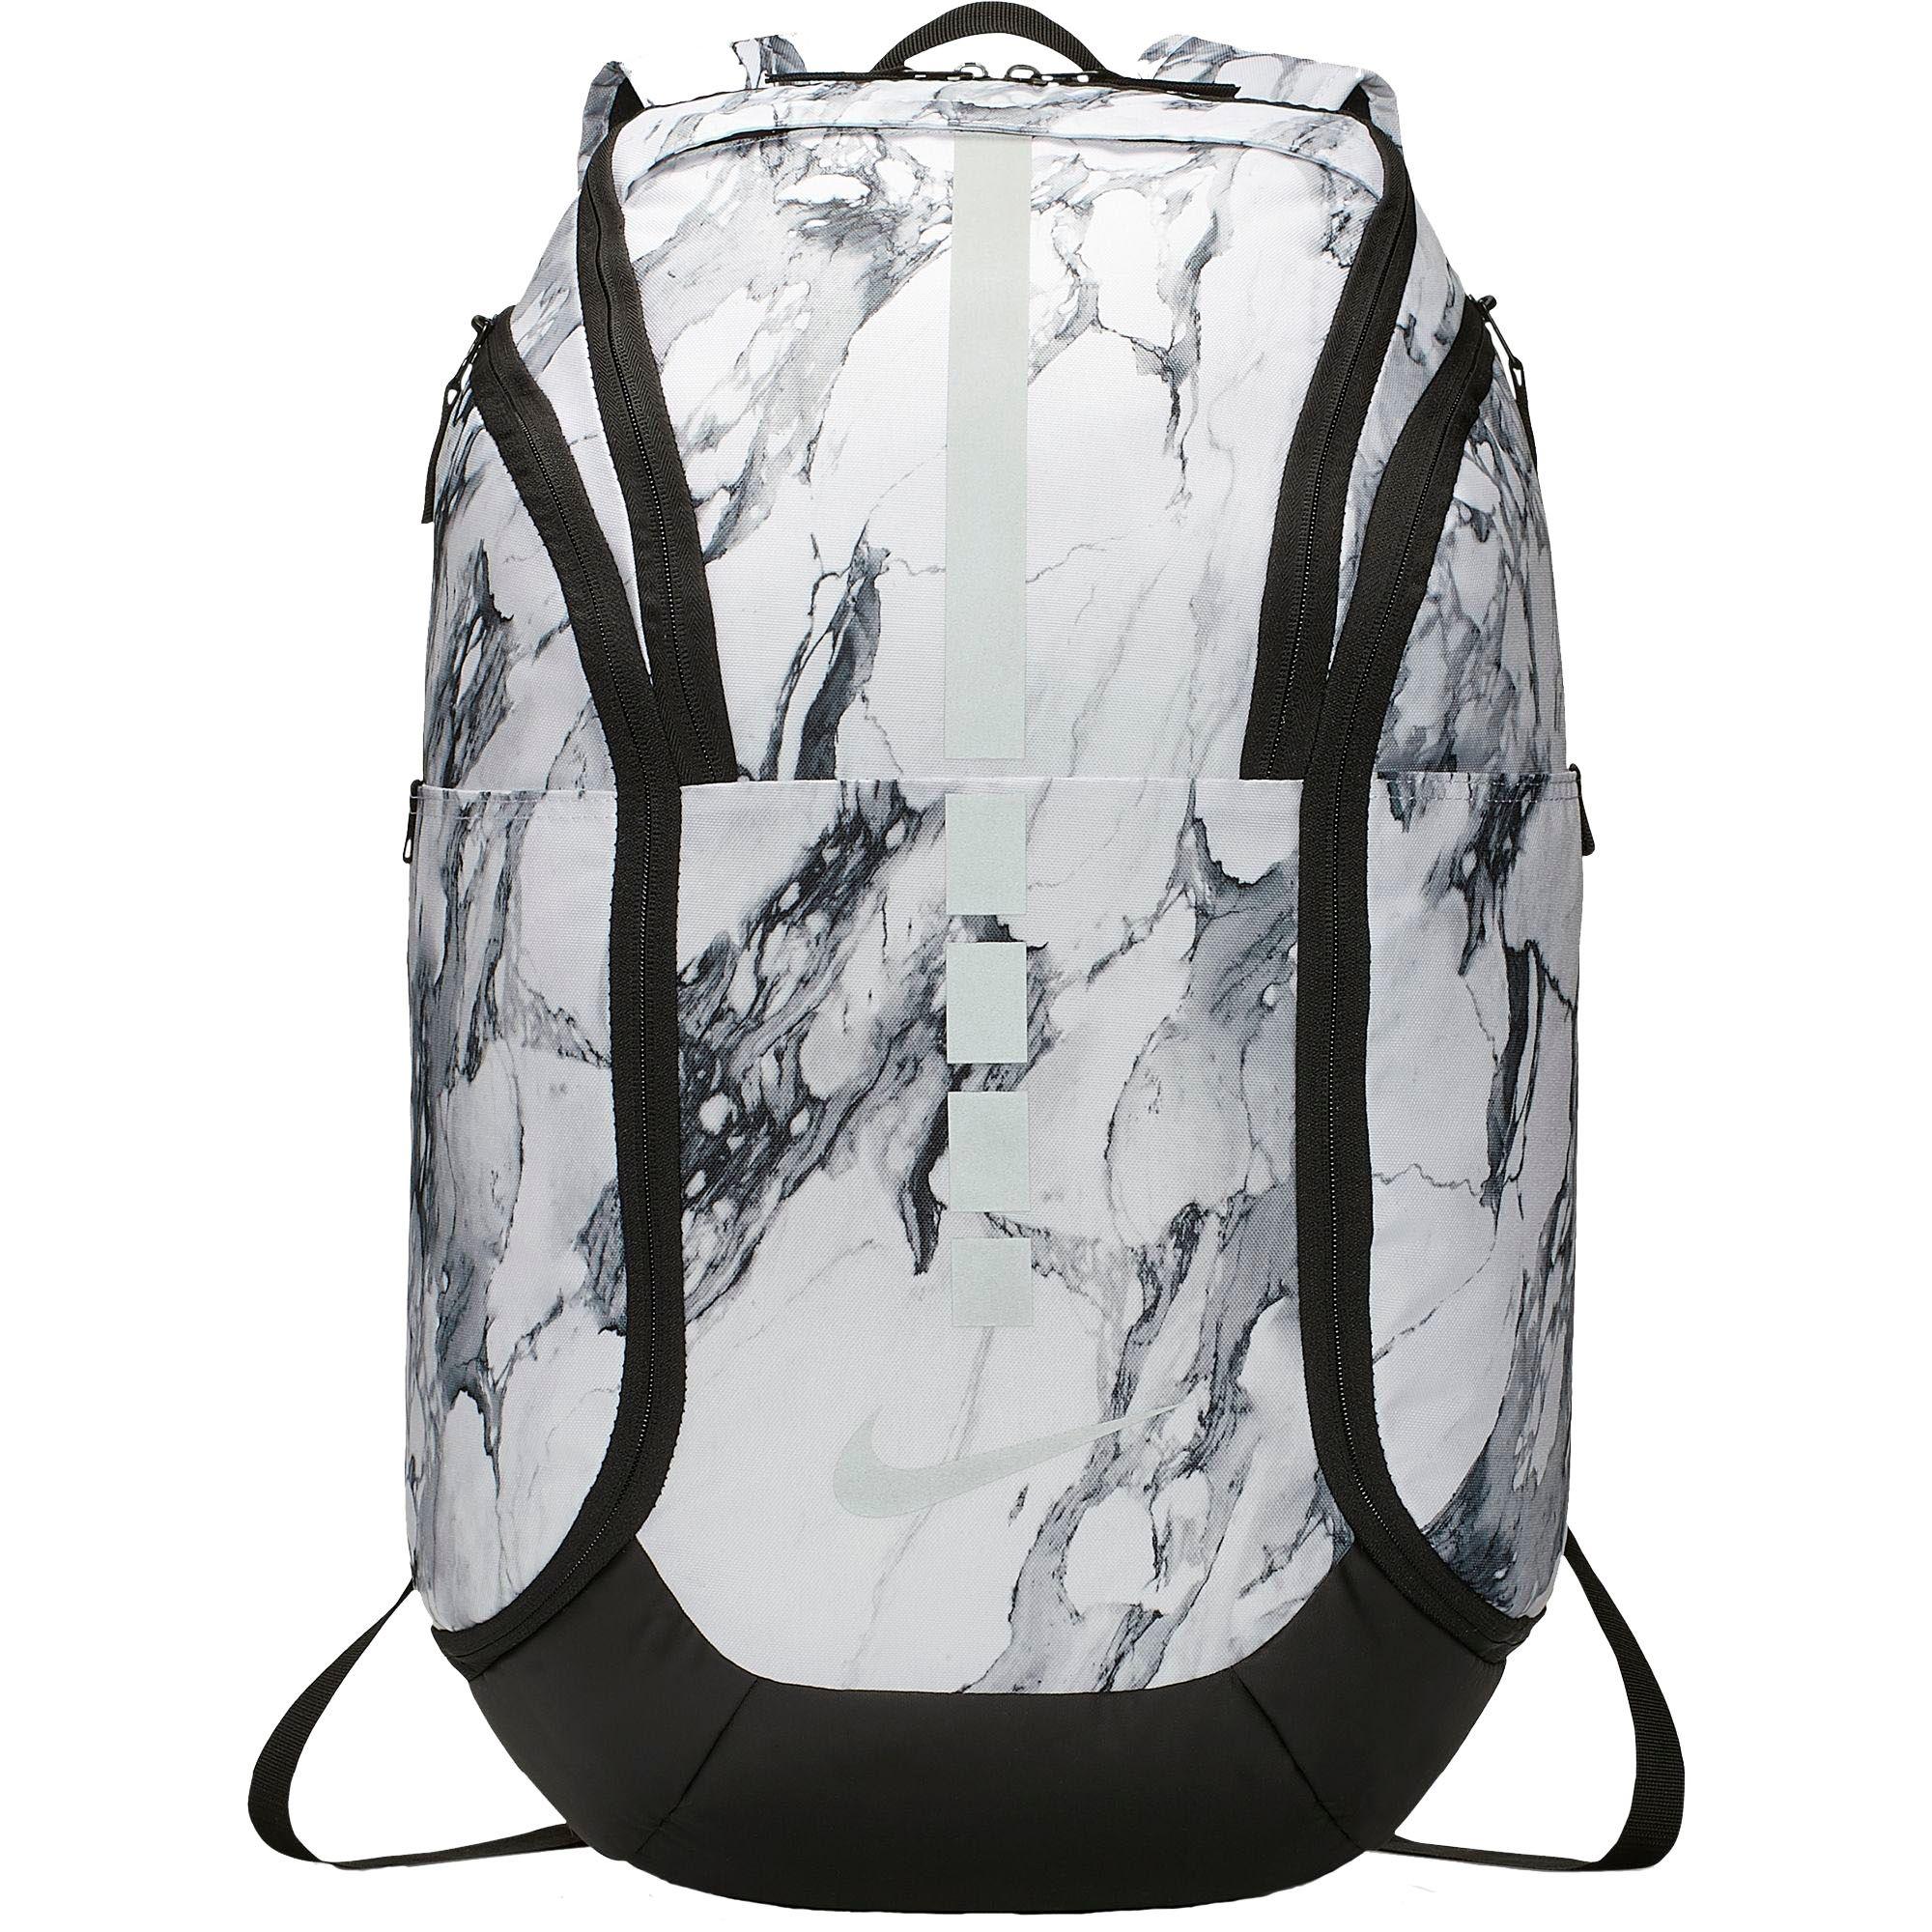 Nike Pro Elite Basketball Backpack Sale, 63% OFF |  www.angloamericancentre.it